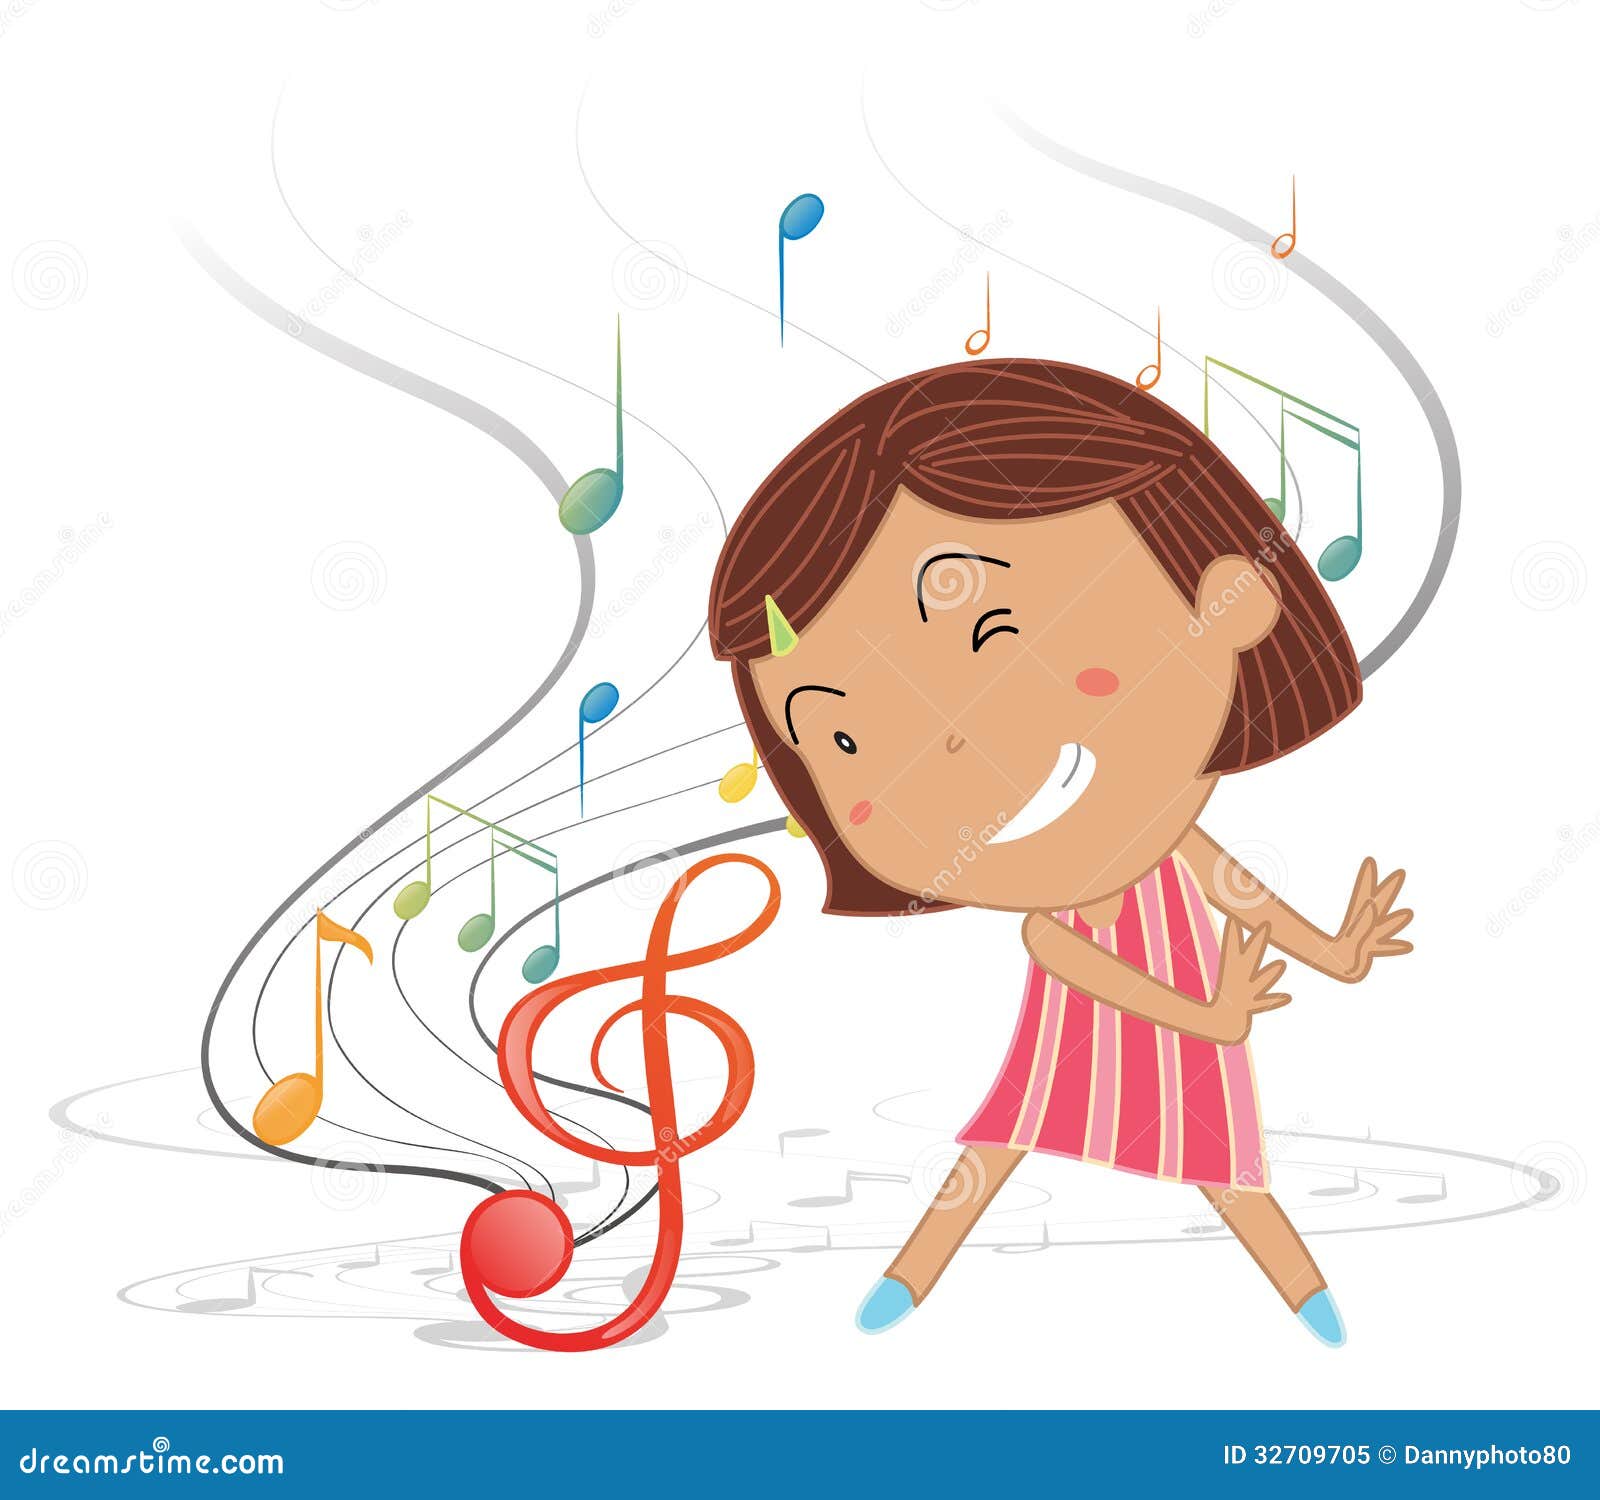 clipart of a girl dancing - photo #17